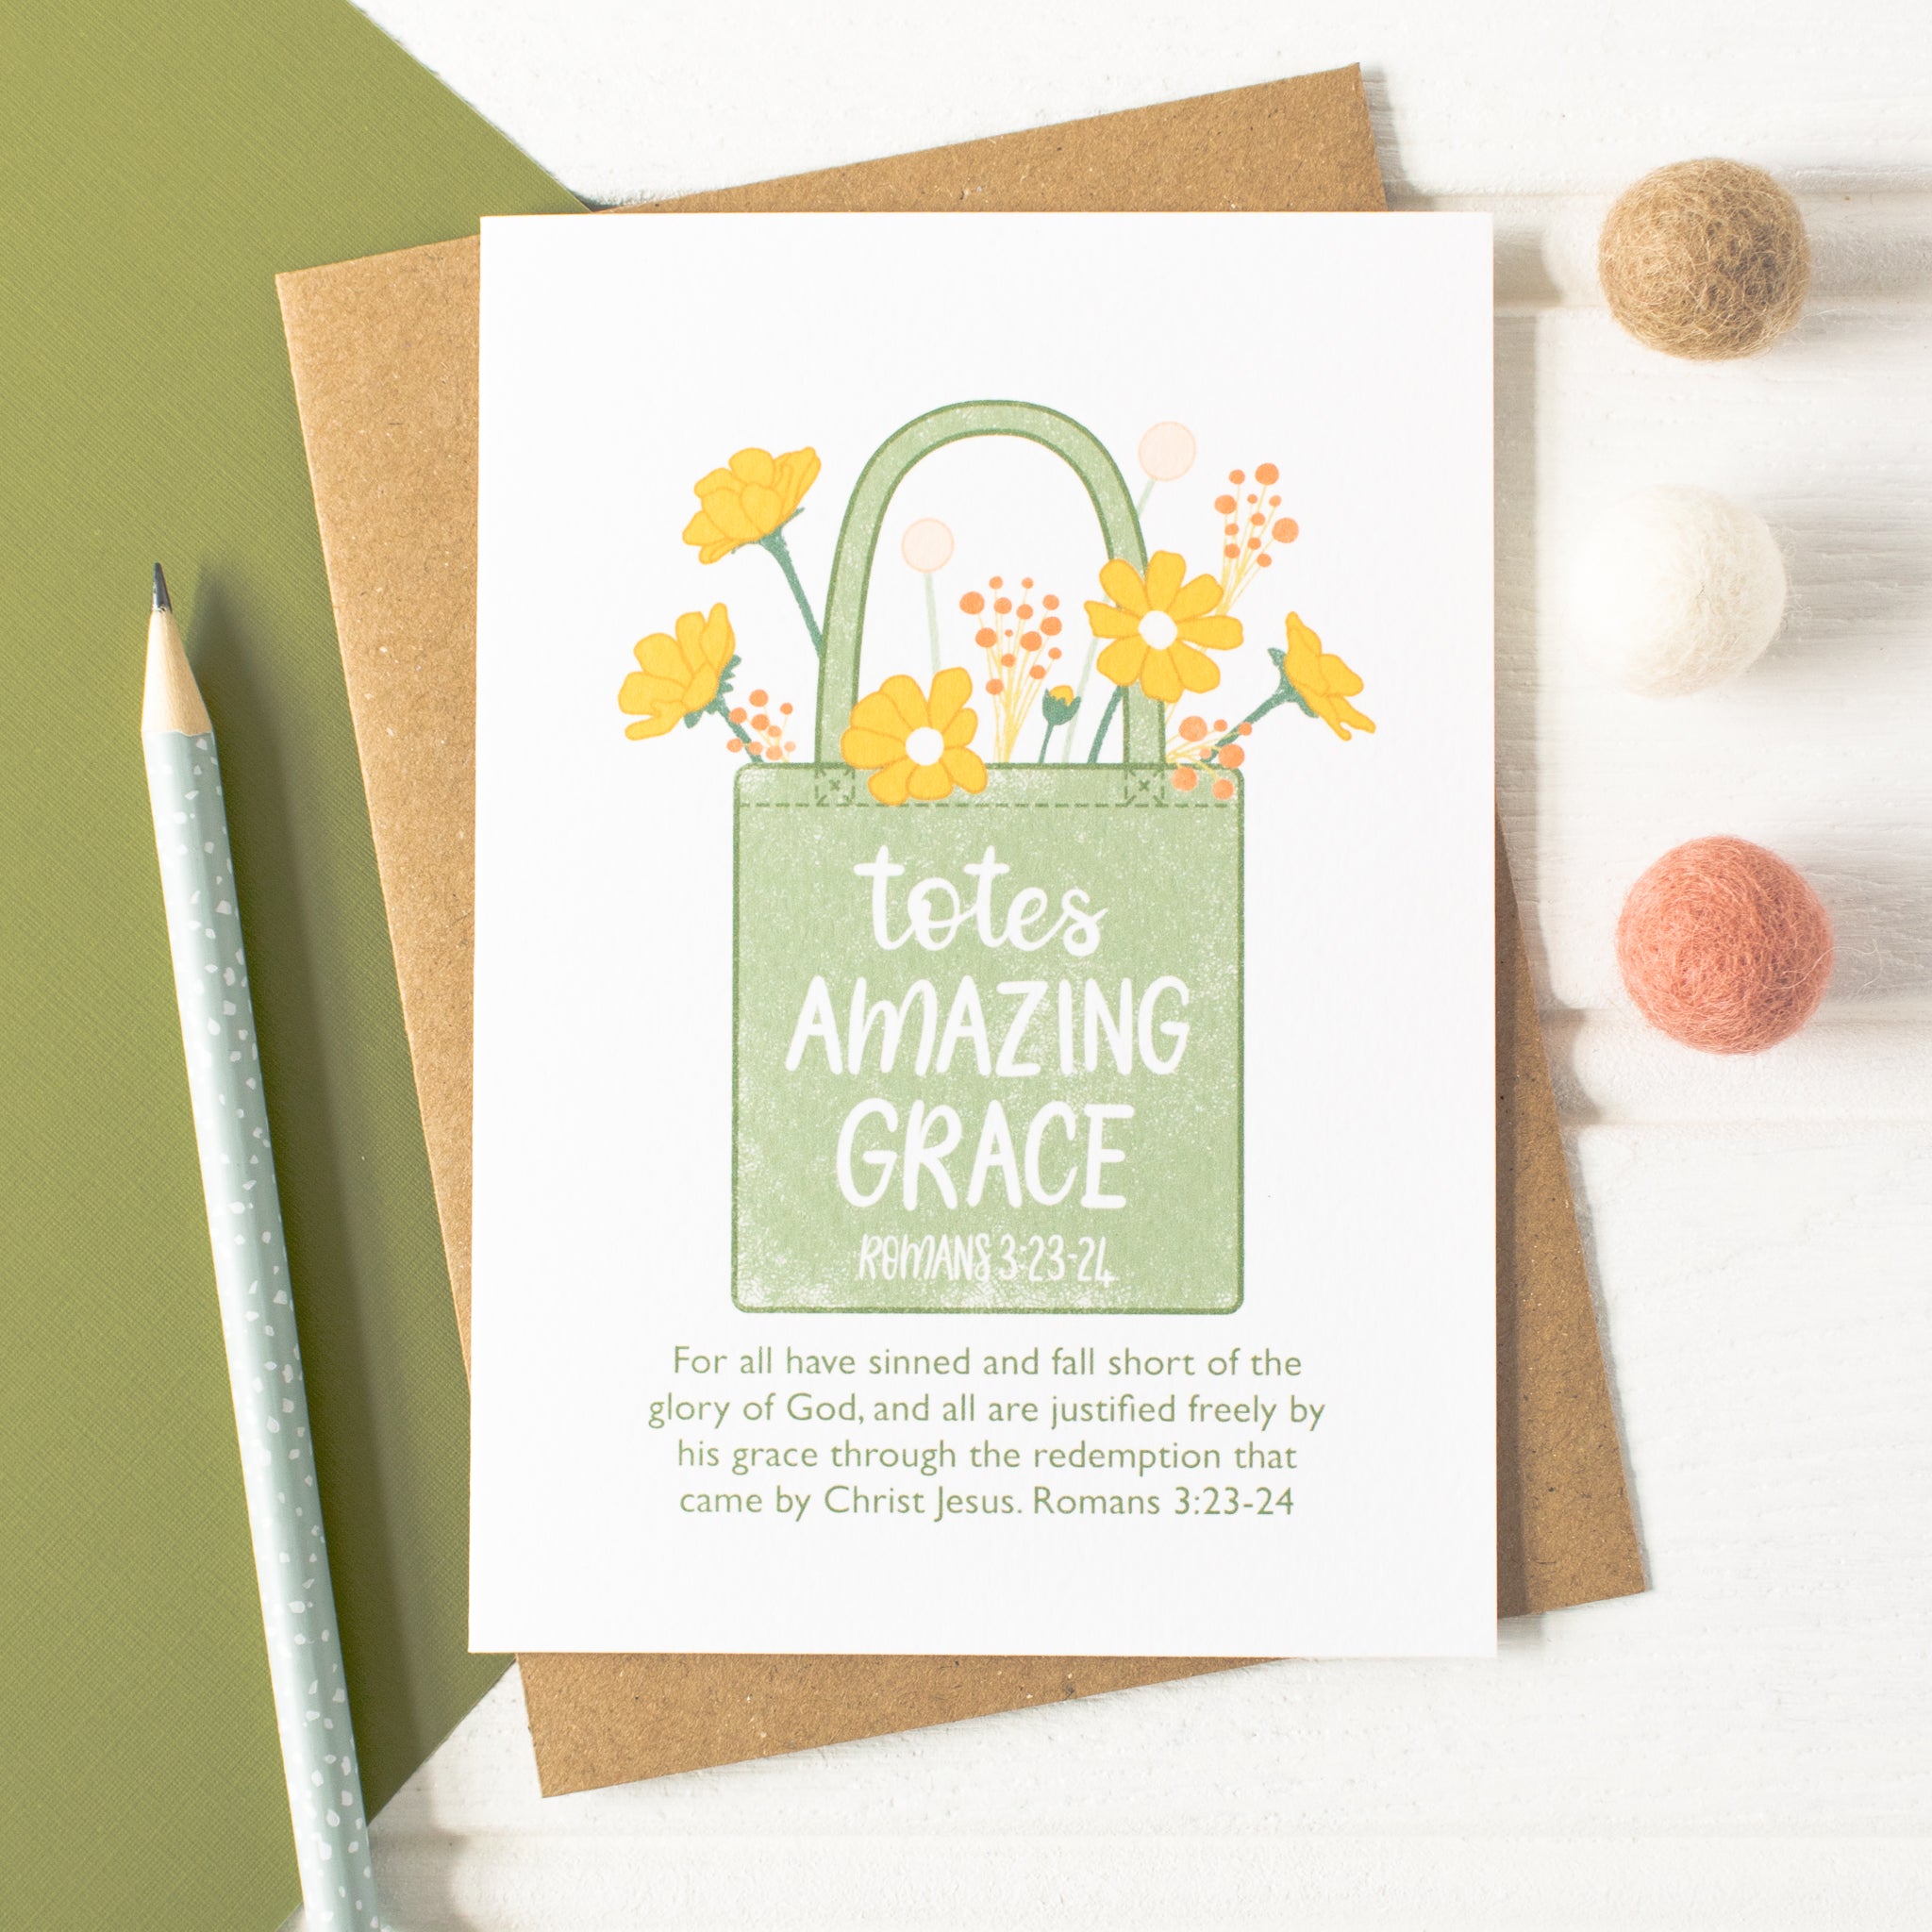 Totes Amazing Grace Card from the Totes Bible Verse Card Pack